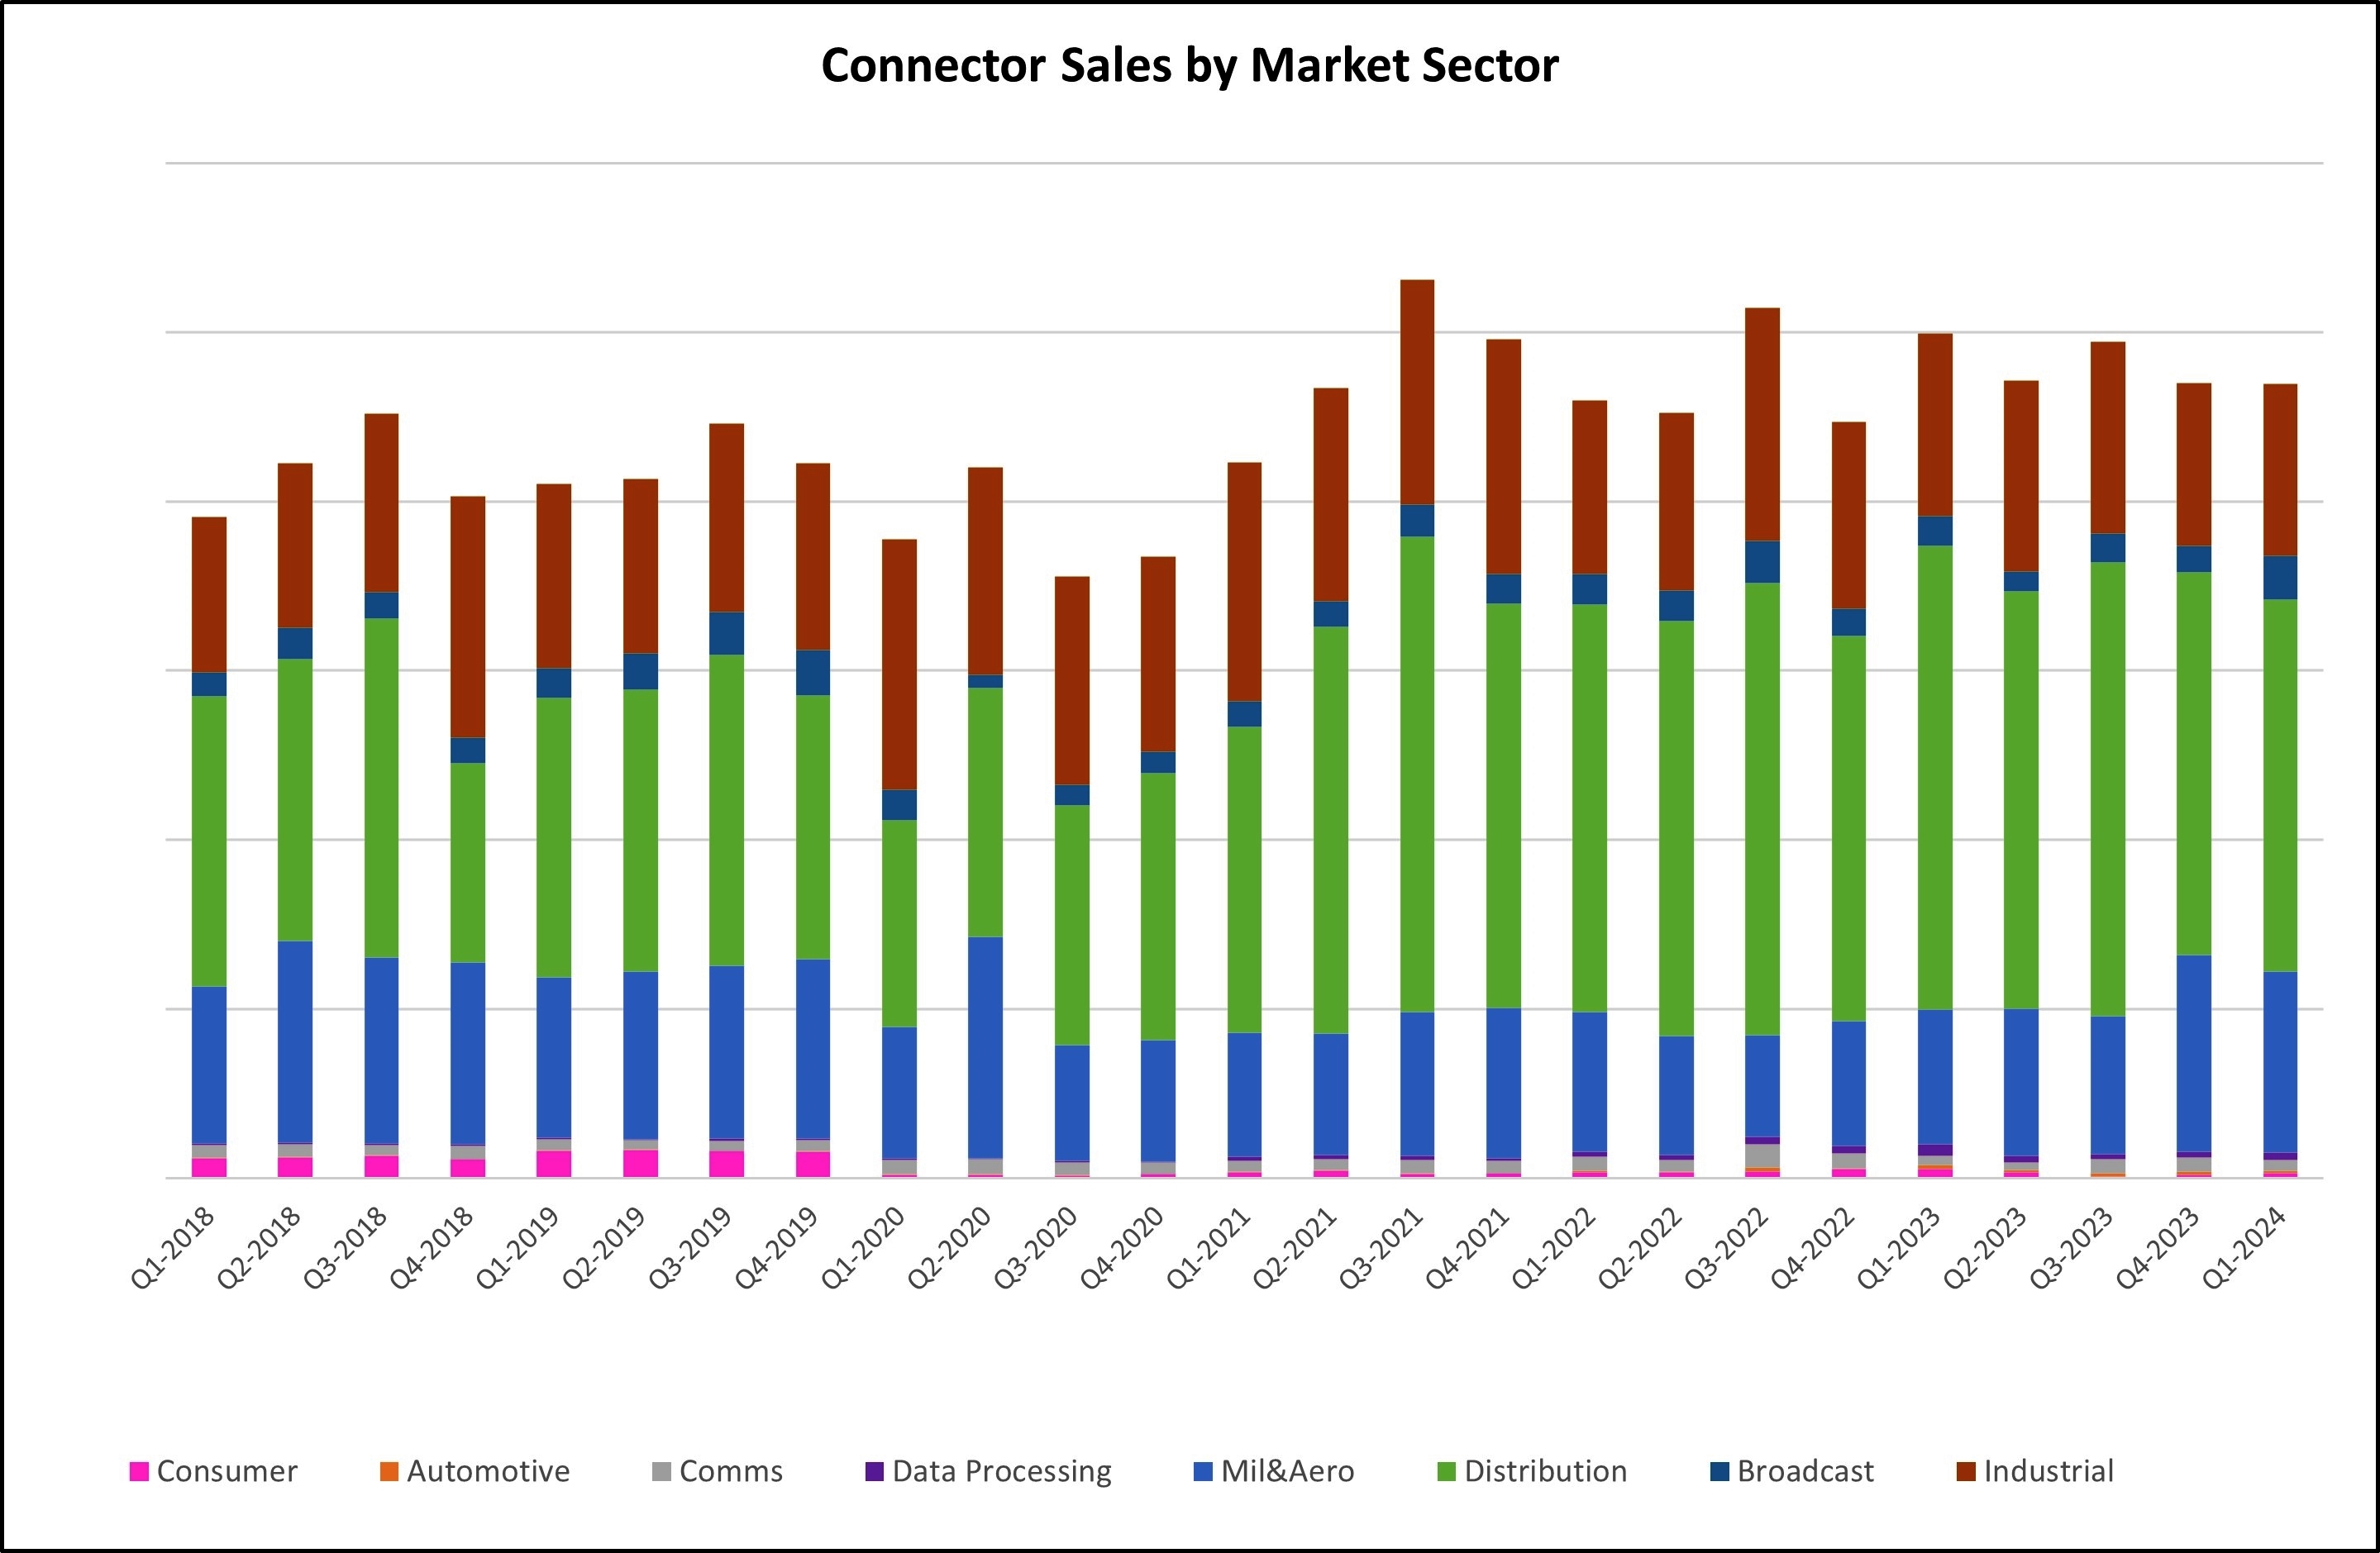 UK connector orders up 10% in Q1